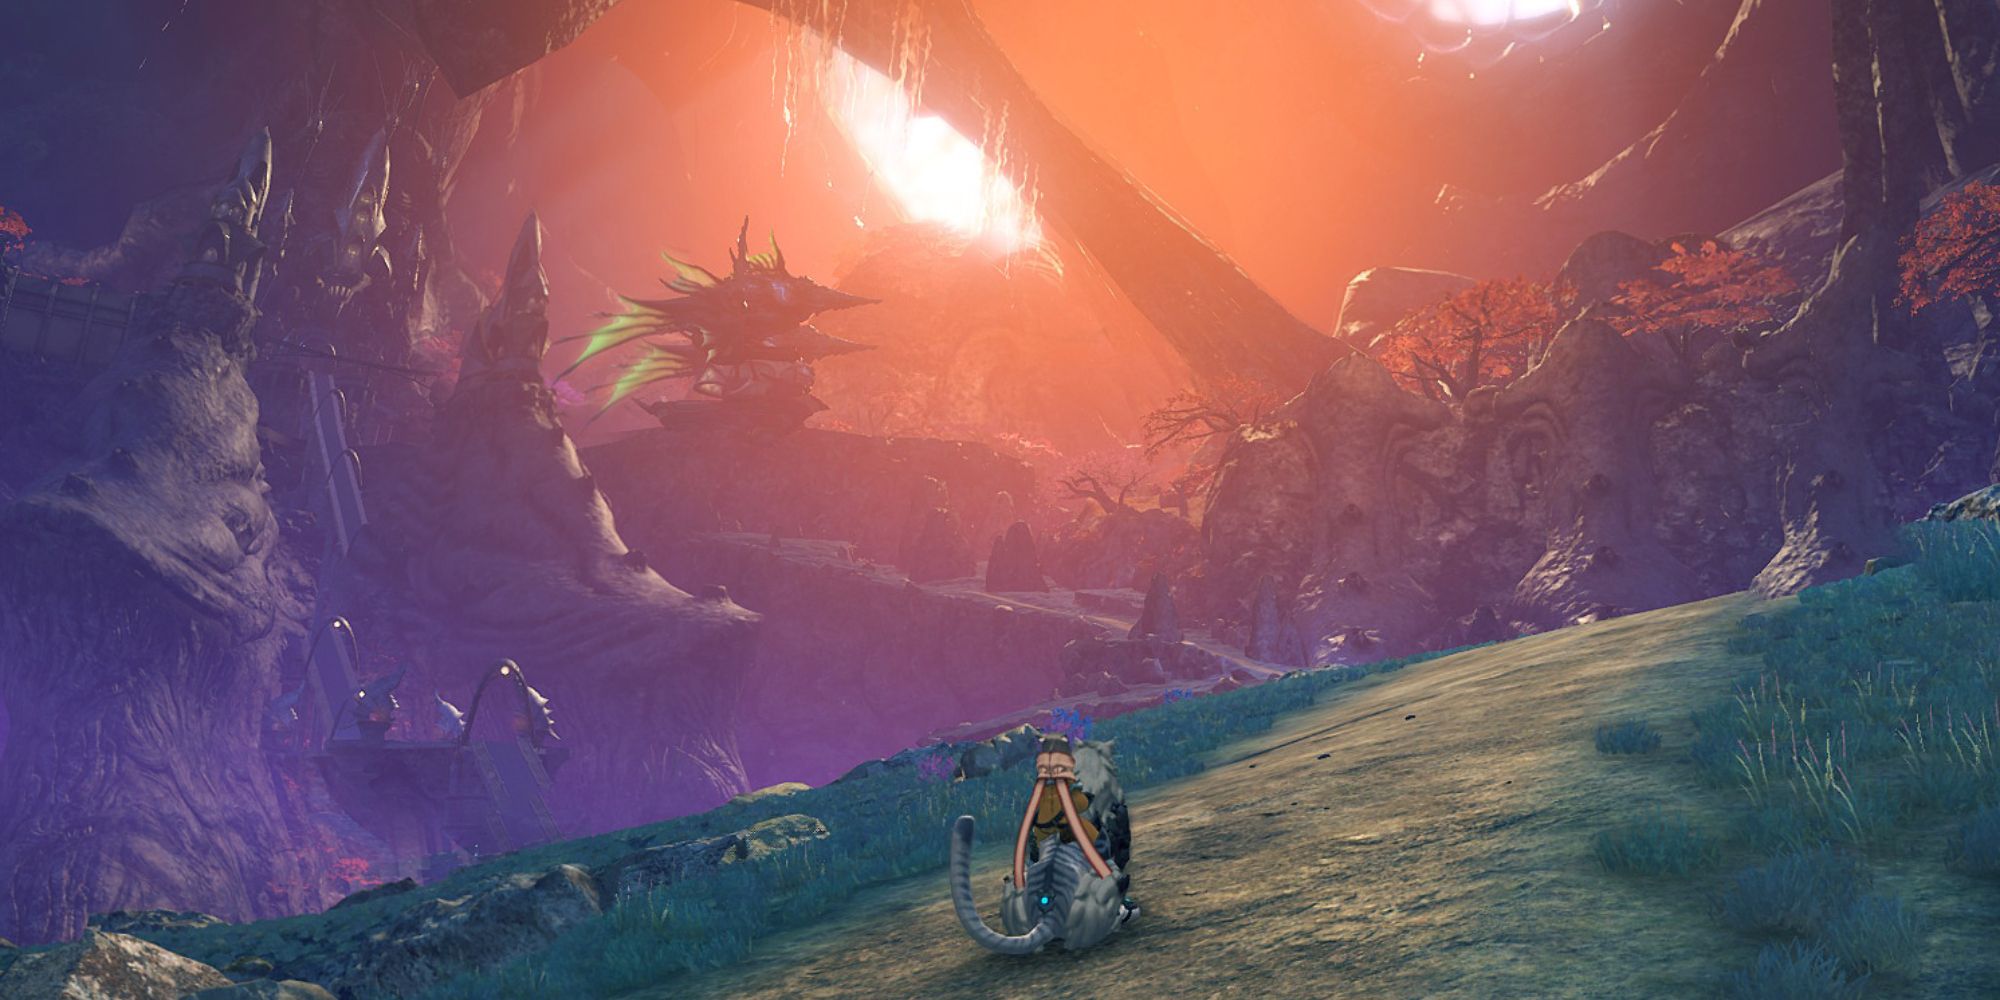 Xenoblade Chronicles 2 Locations a wide shot of The Kingdom of Uraya with Nia and Dromarch stood in the foreground watching a sunset in the distance